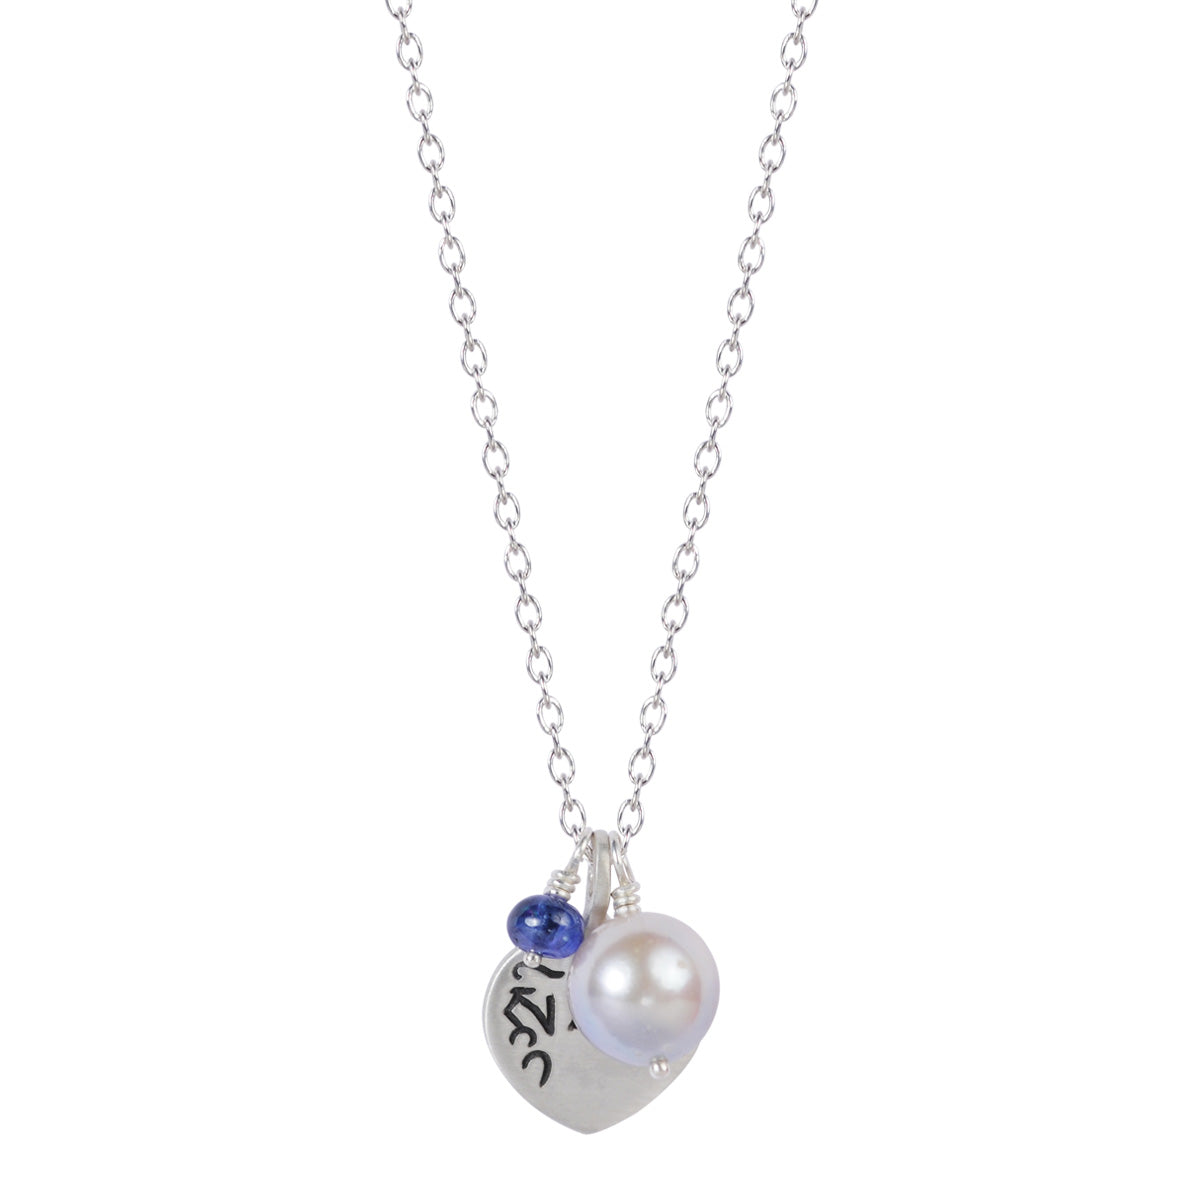 Sterling Silver Compassion Trinket Pendant with Akoya Pearl and Sapphire